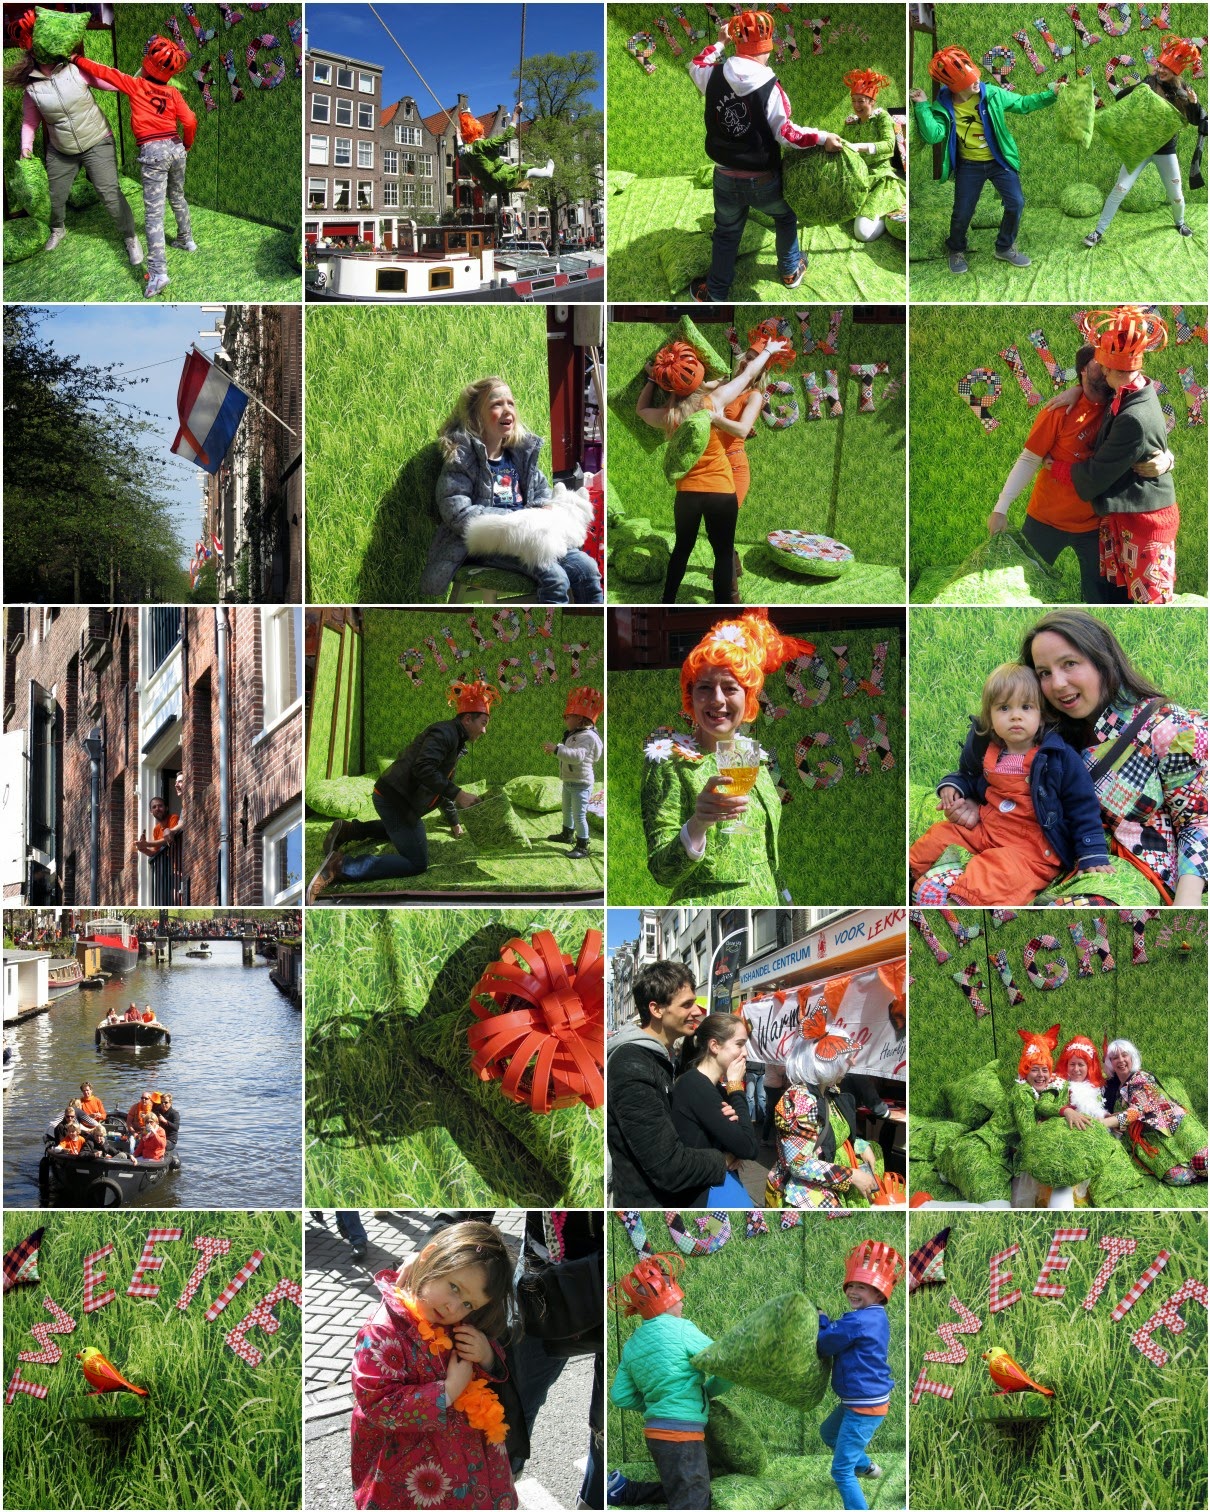 mosaic of King's Day 2015